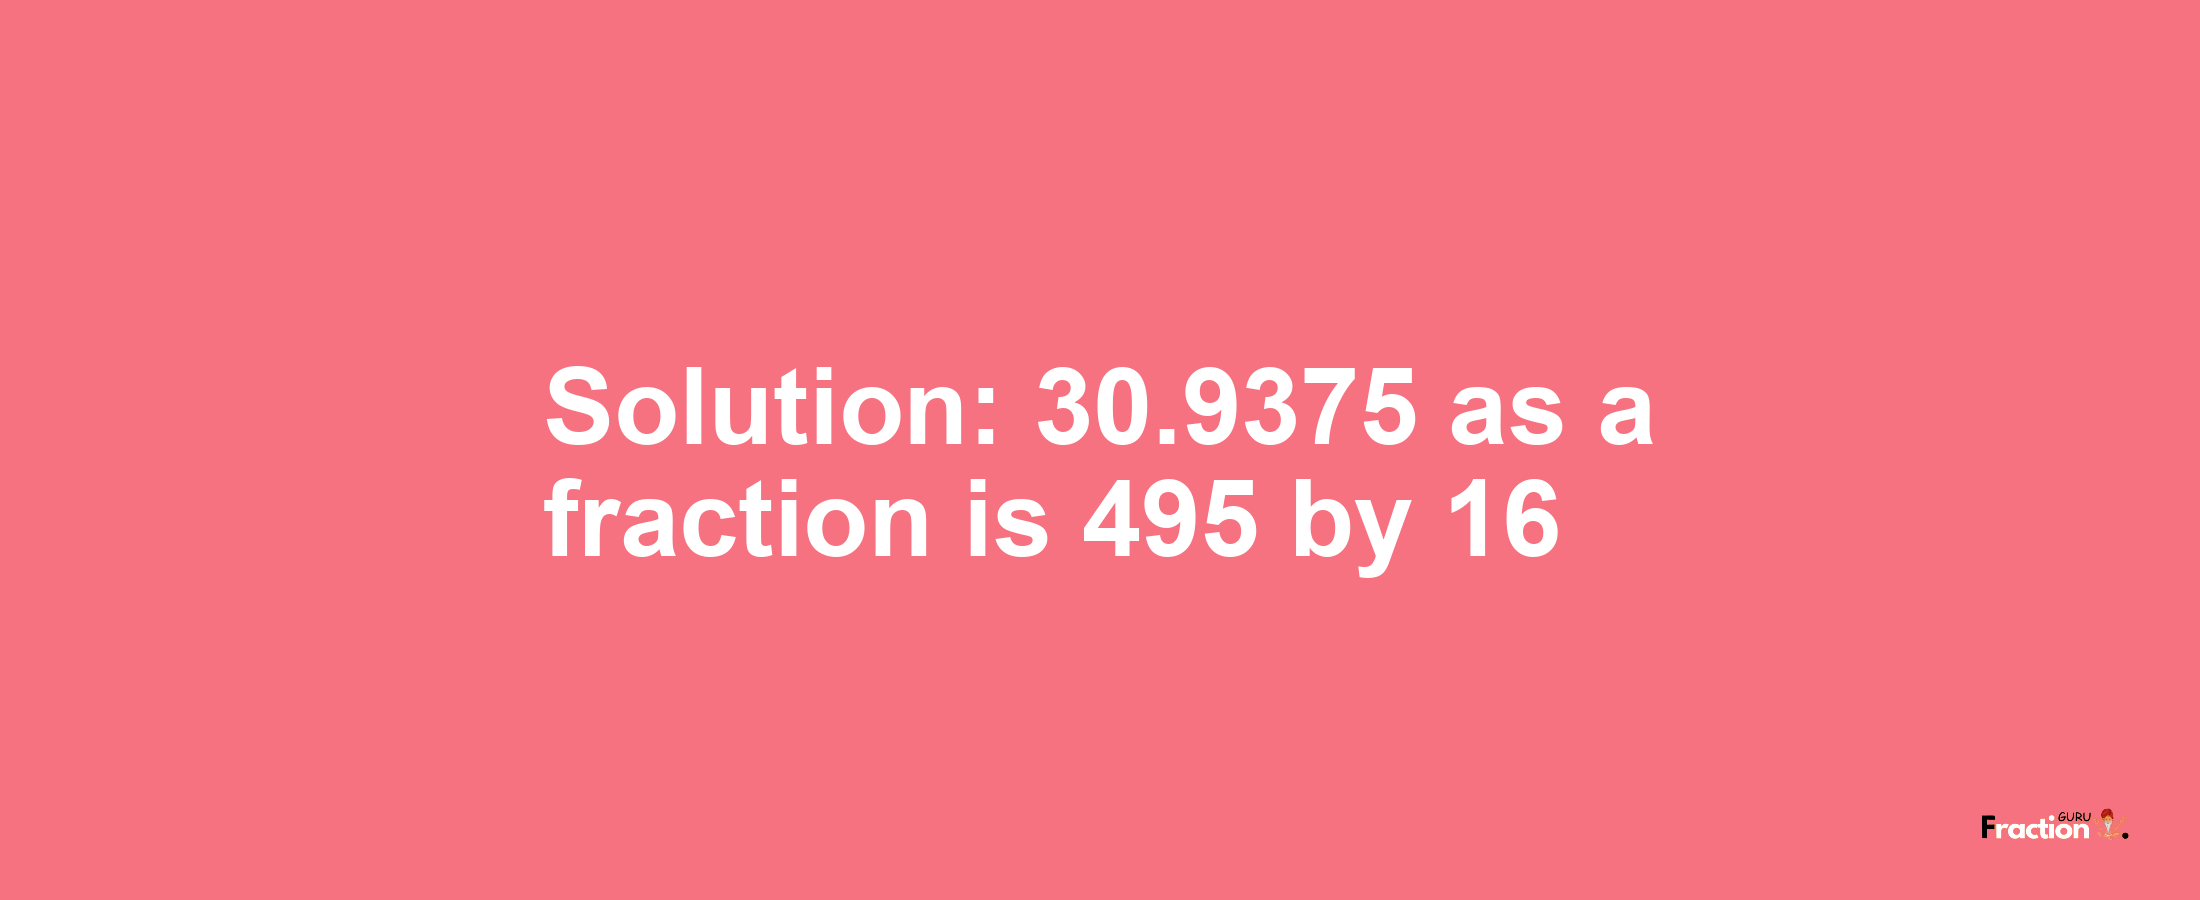 Solution:30.9375 as a fraction is 495/16